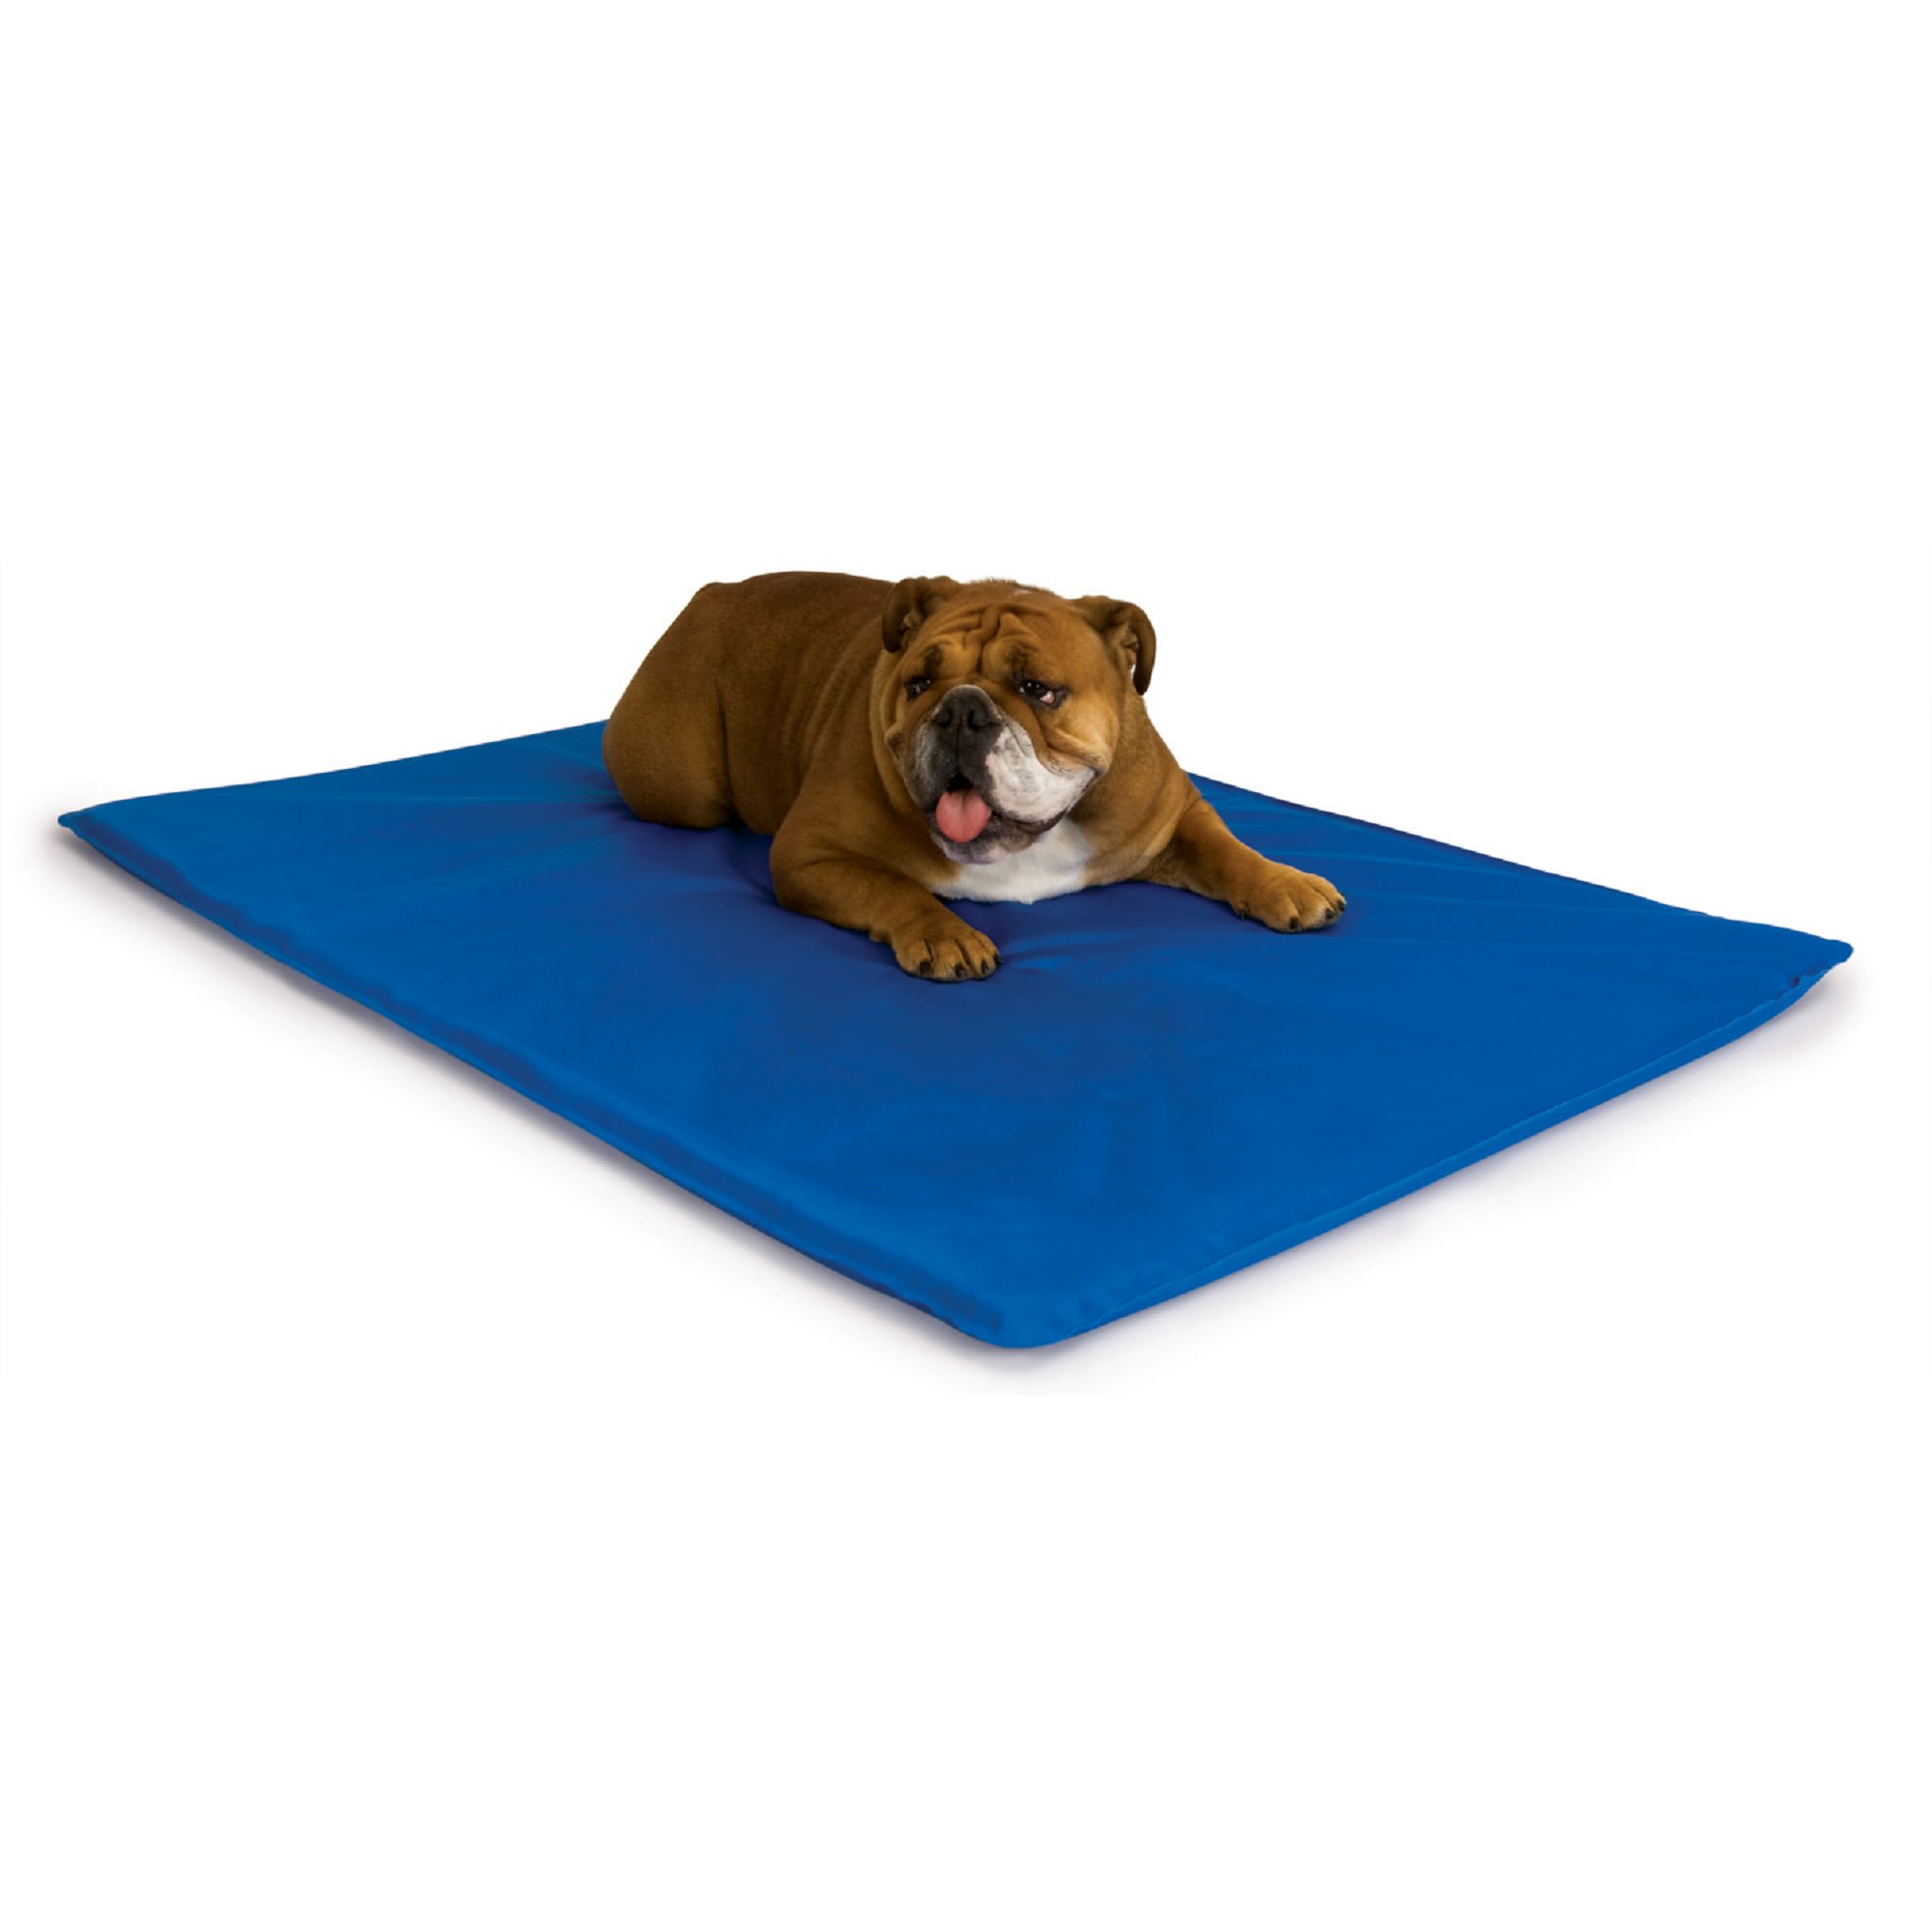 Photos - Bed & Furniture K&H Cool Blue Bed III for Dogs, 22" L X 32" W, Medium, Blue 100213003 